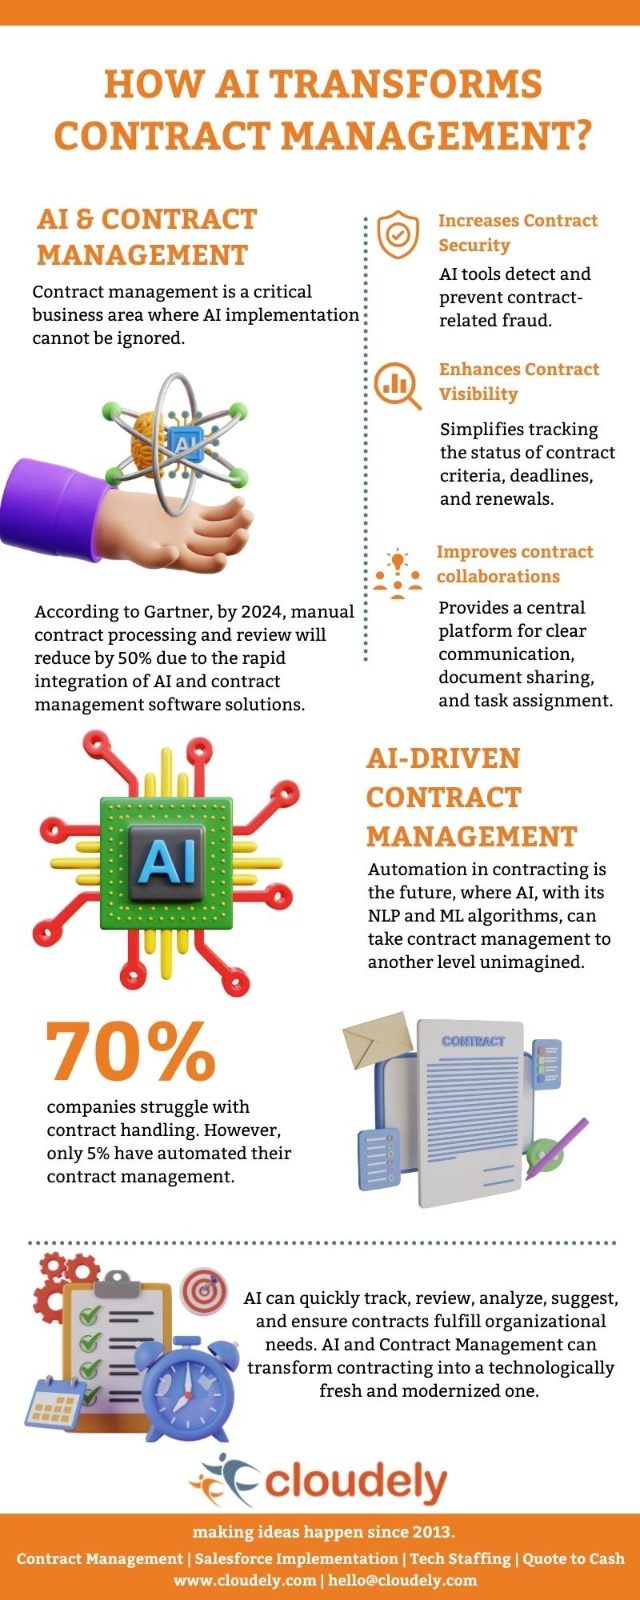 Contract management and AI